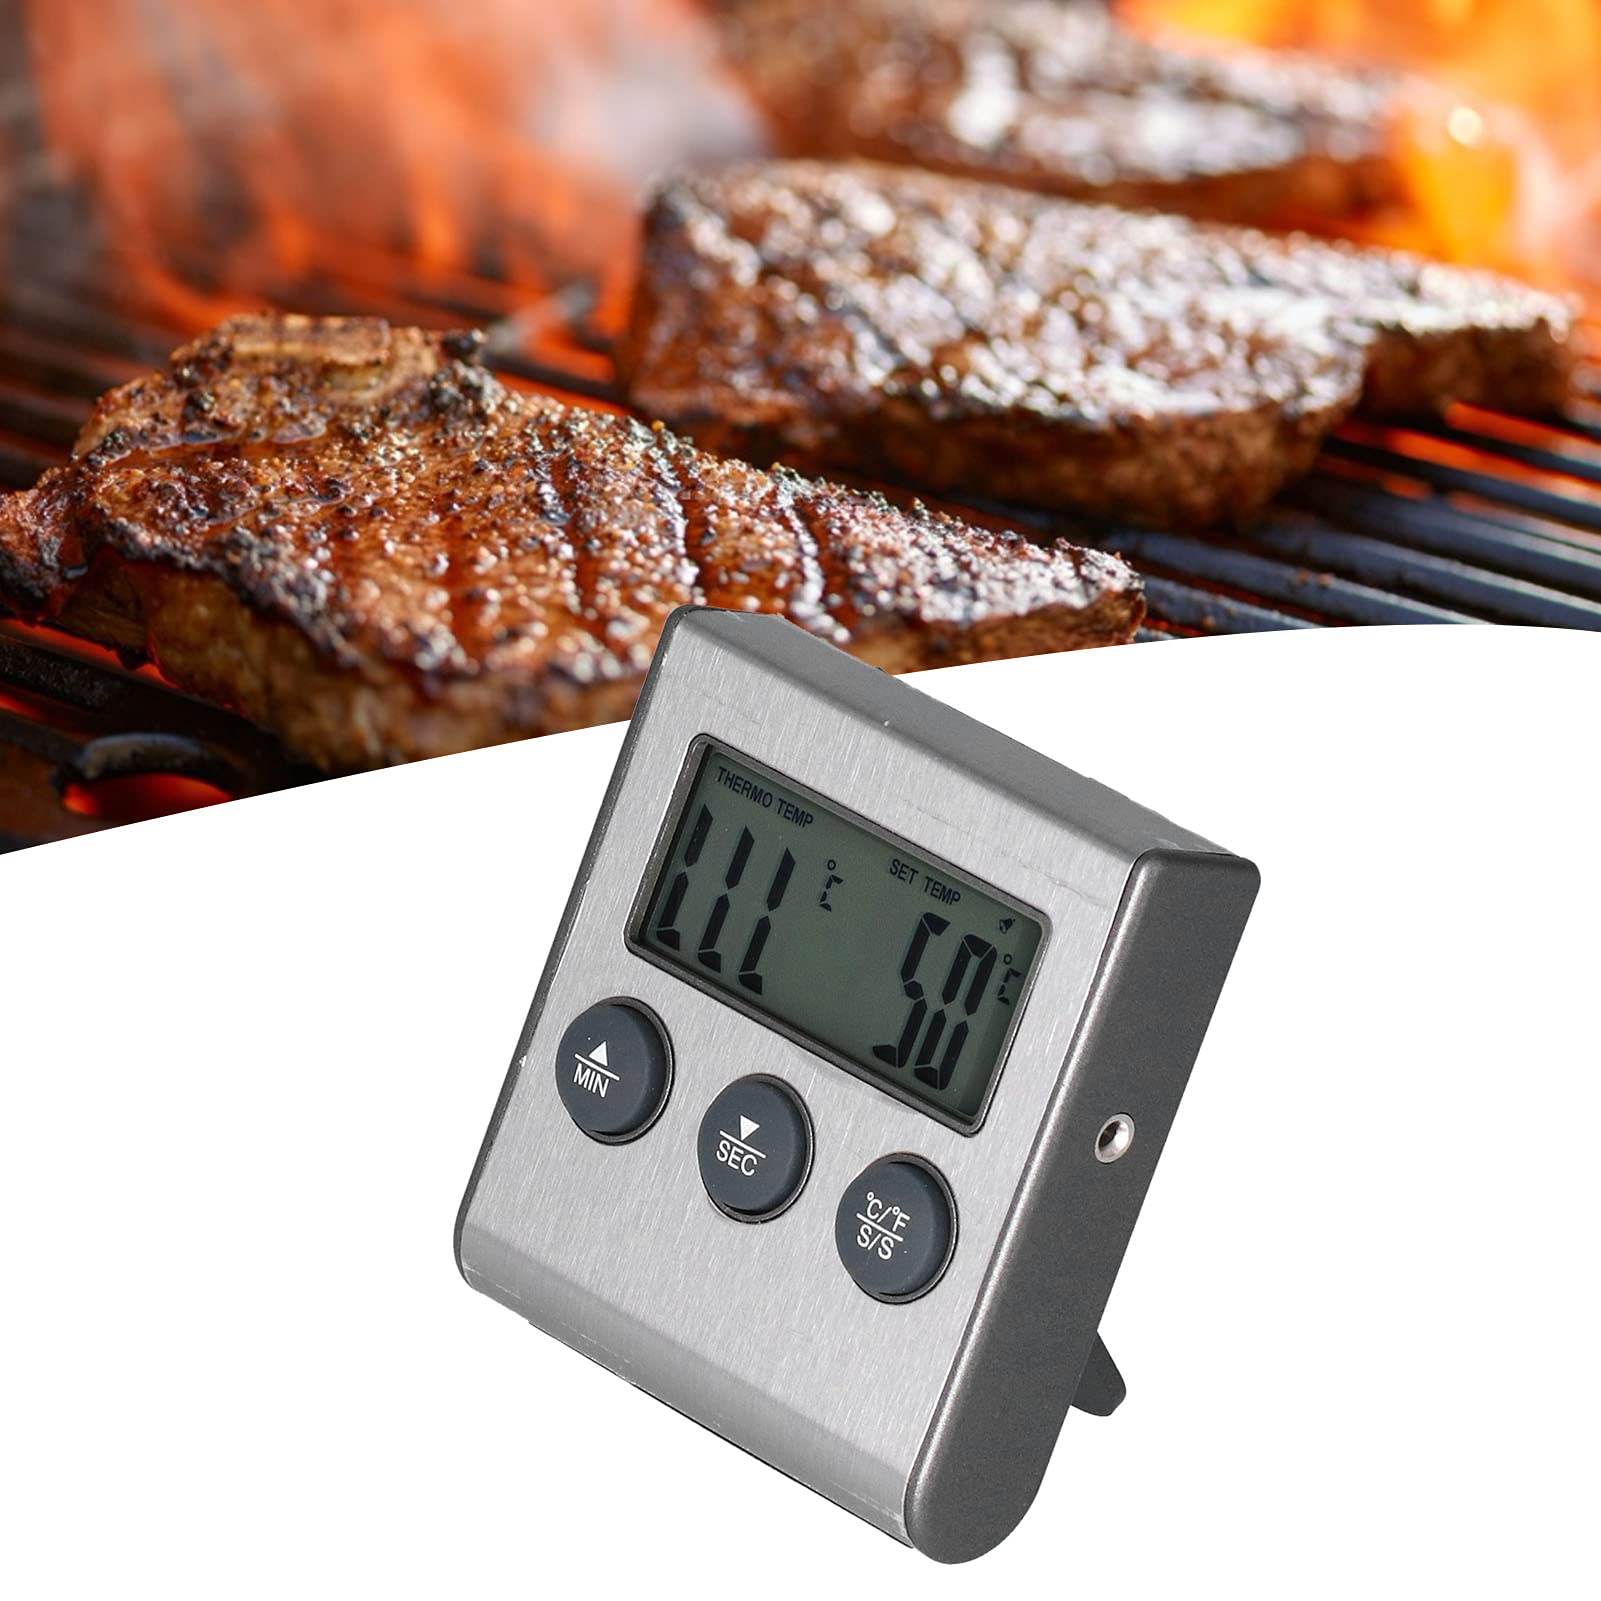 Digital Meat Thermometer for Cooking, Magnet Design Barbecue Thermometer with Alarm Function, Food Meat Temperature Meter Grill Thermometer for Kitchen